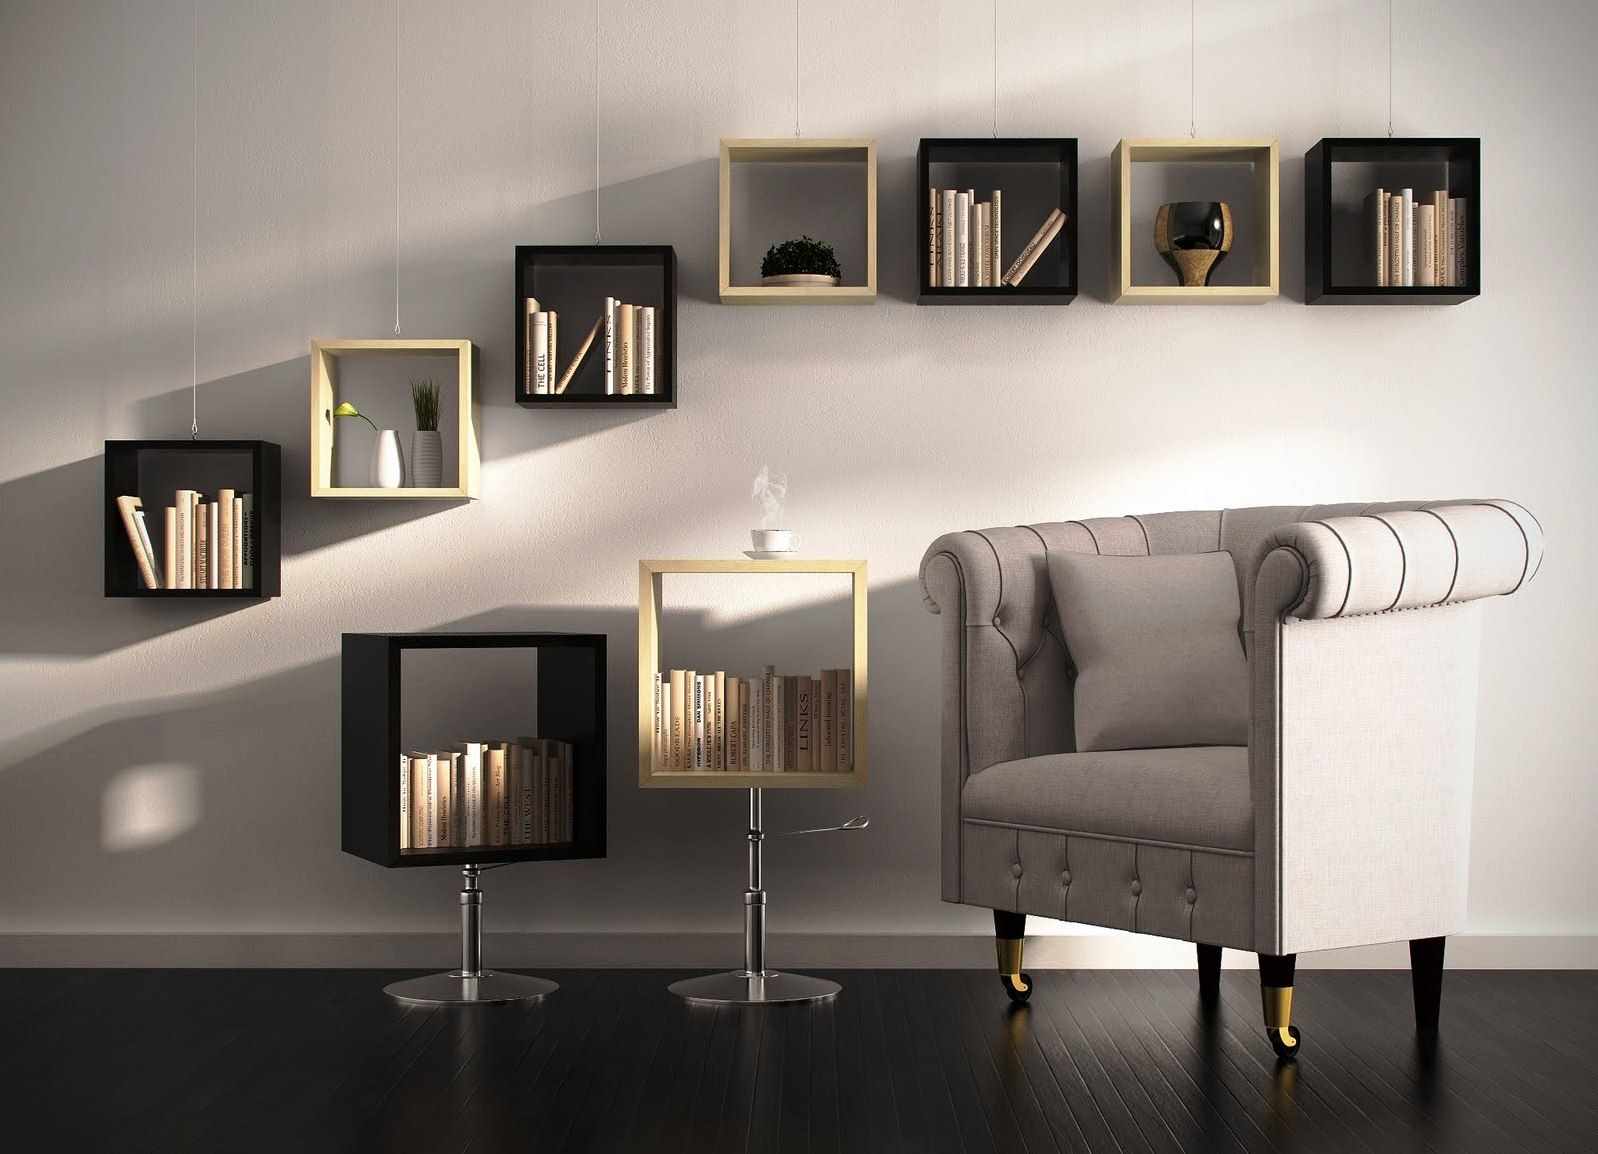 An example of a light shelf style